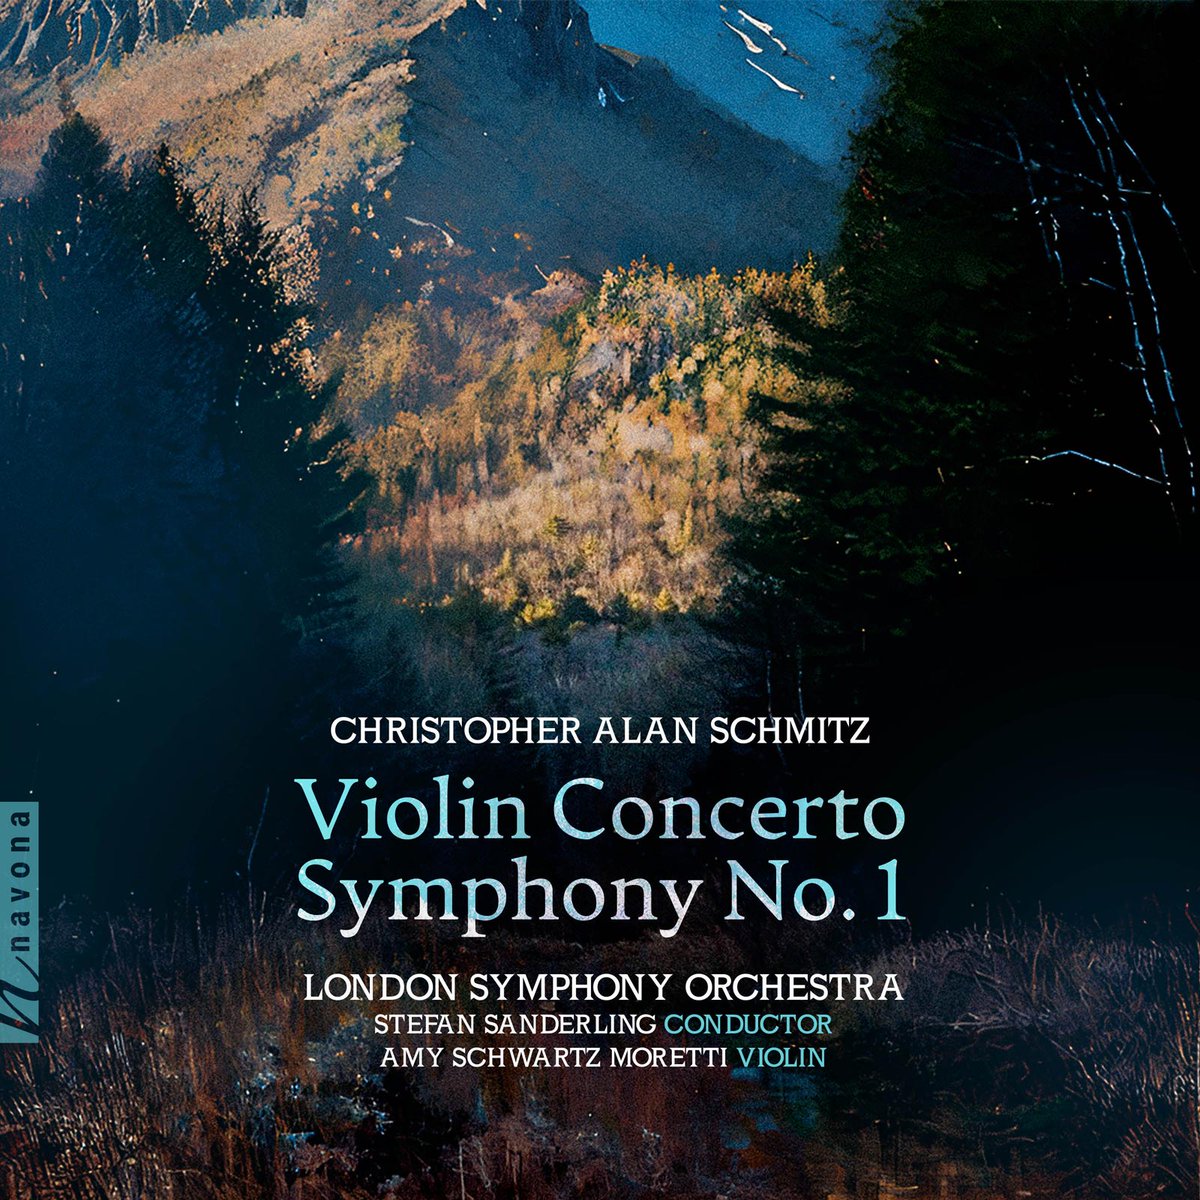 Composer Christopher A. Schmitz's Symphony No. 1 'conveys a strong message' says @PizzicatoMag, who praised the #NavonaRecords release for its 'incredibly refined orchestration.' Read their full review of the piece, performed by the @londonsymphony, here. pizzicato.lu/die-aussagekra…